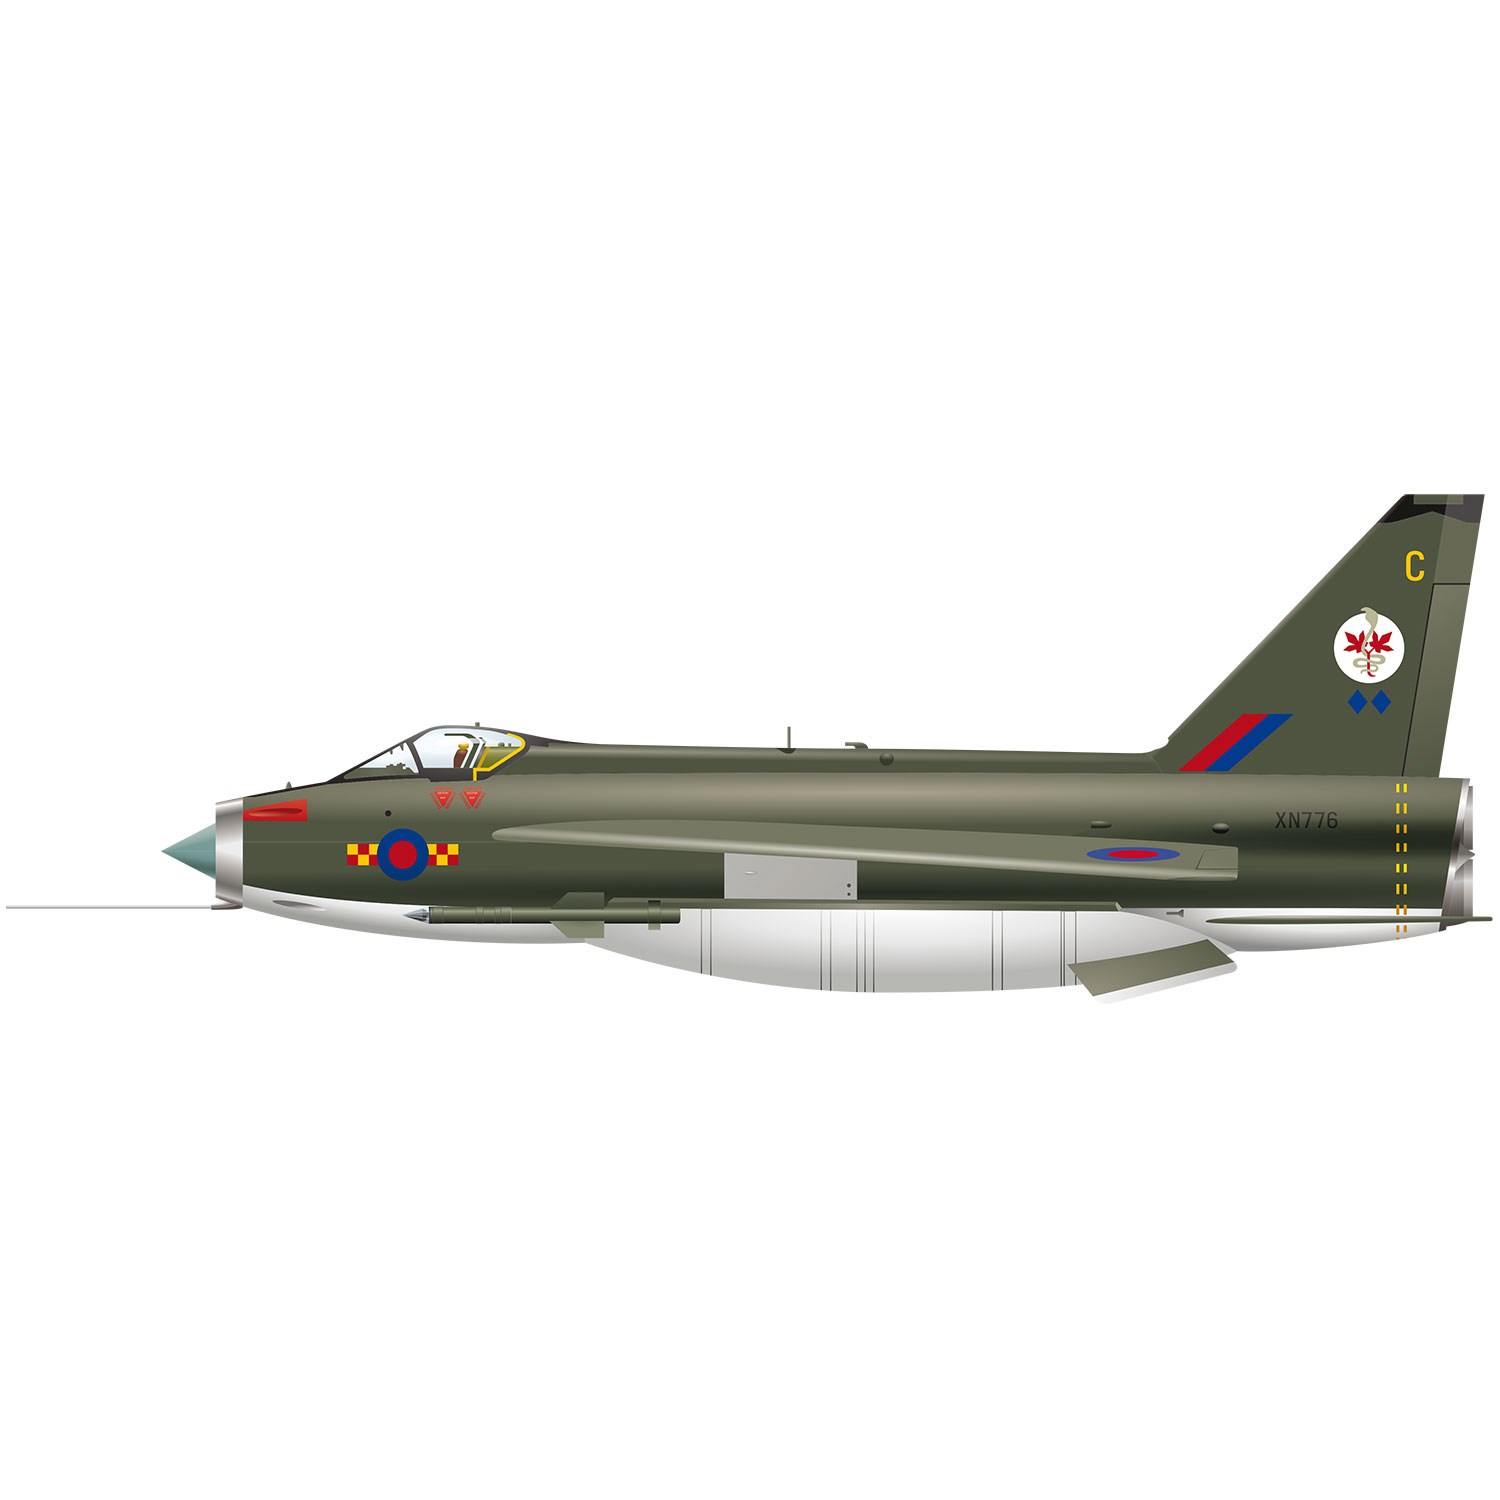 A black English Electric Lightning jet fighter aircraft. 